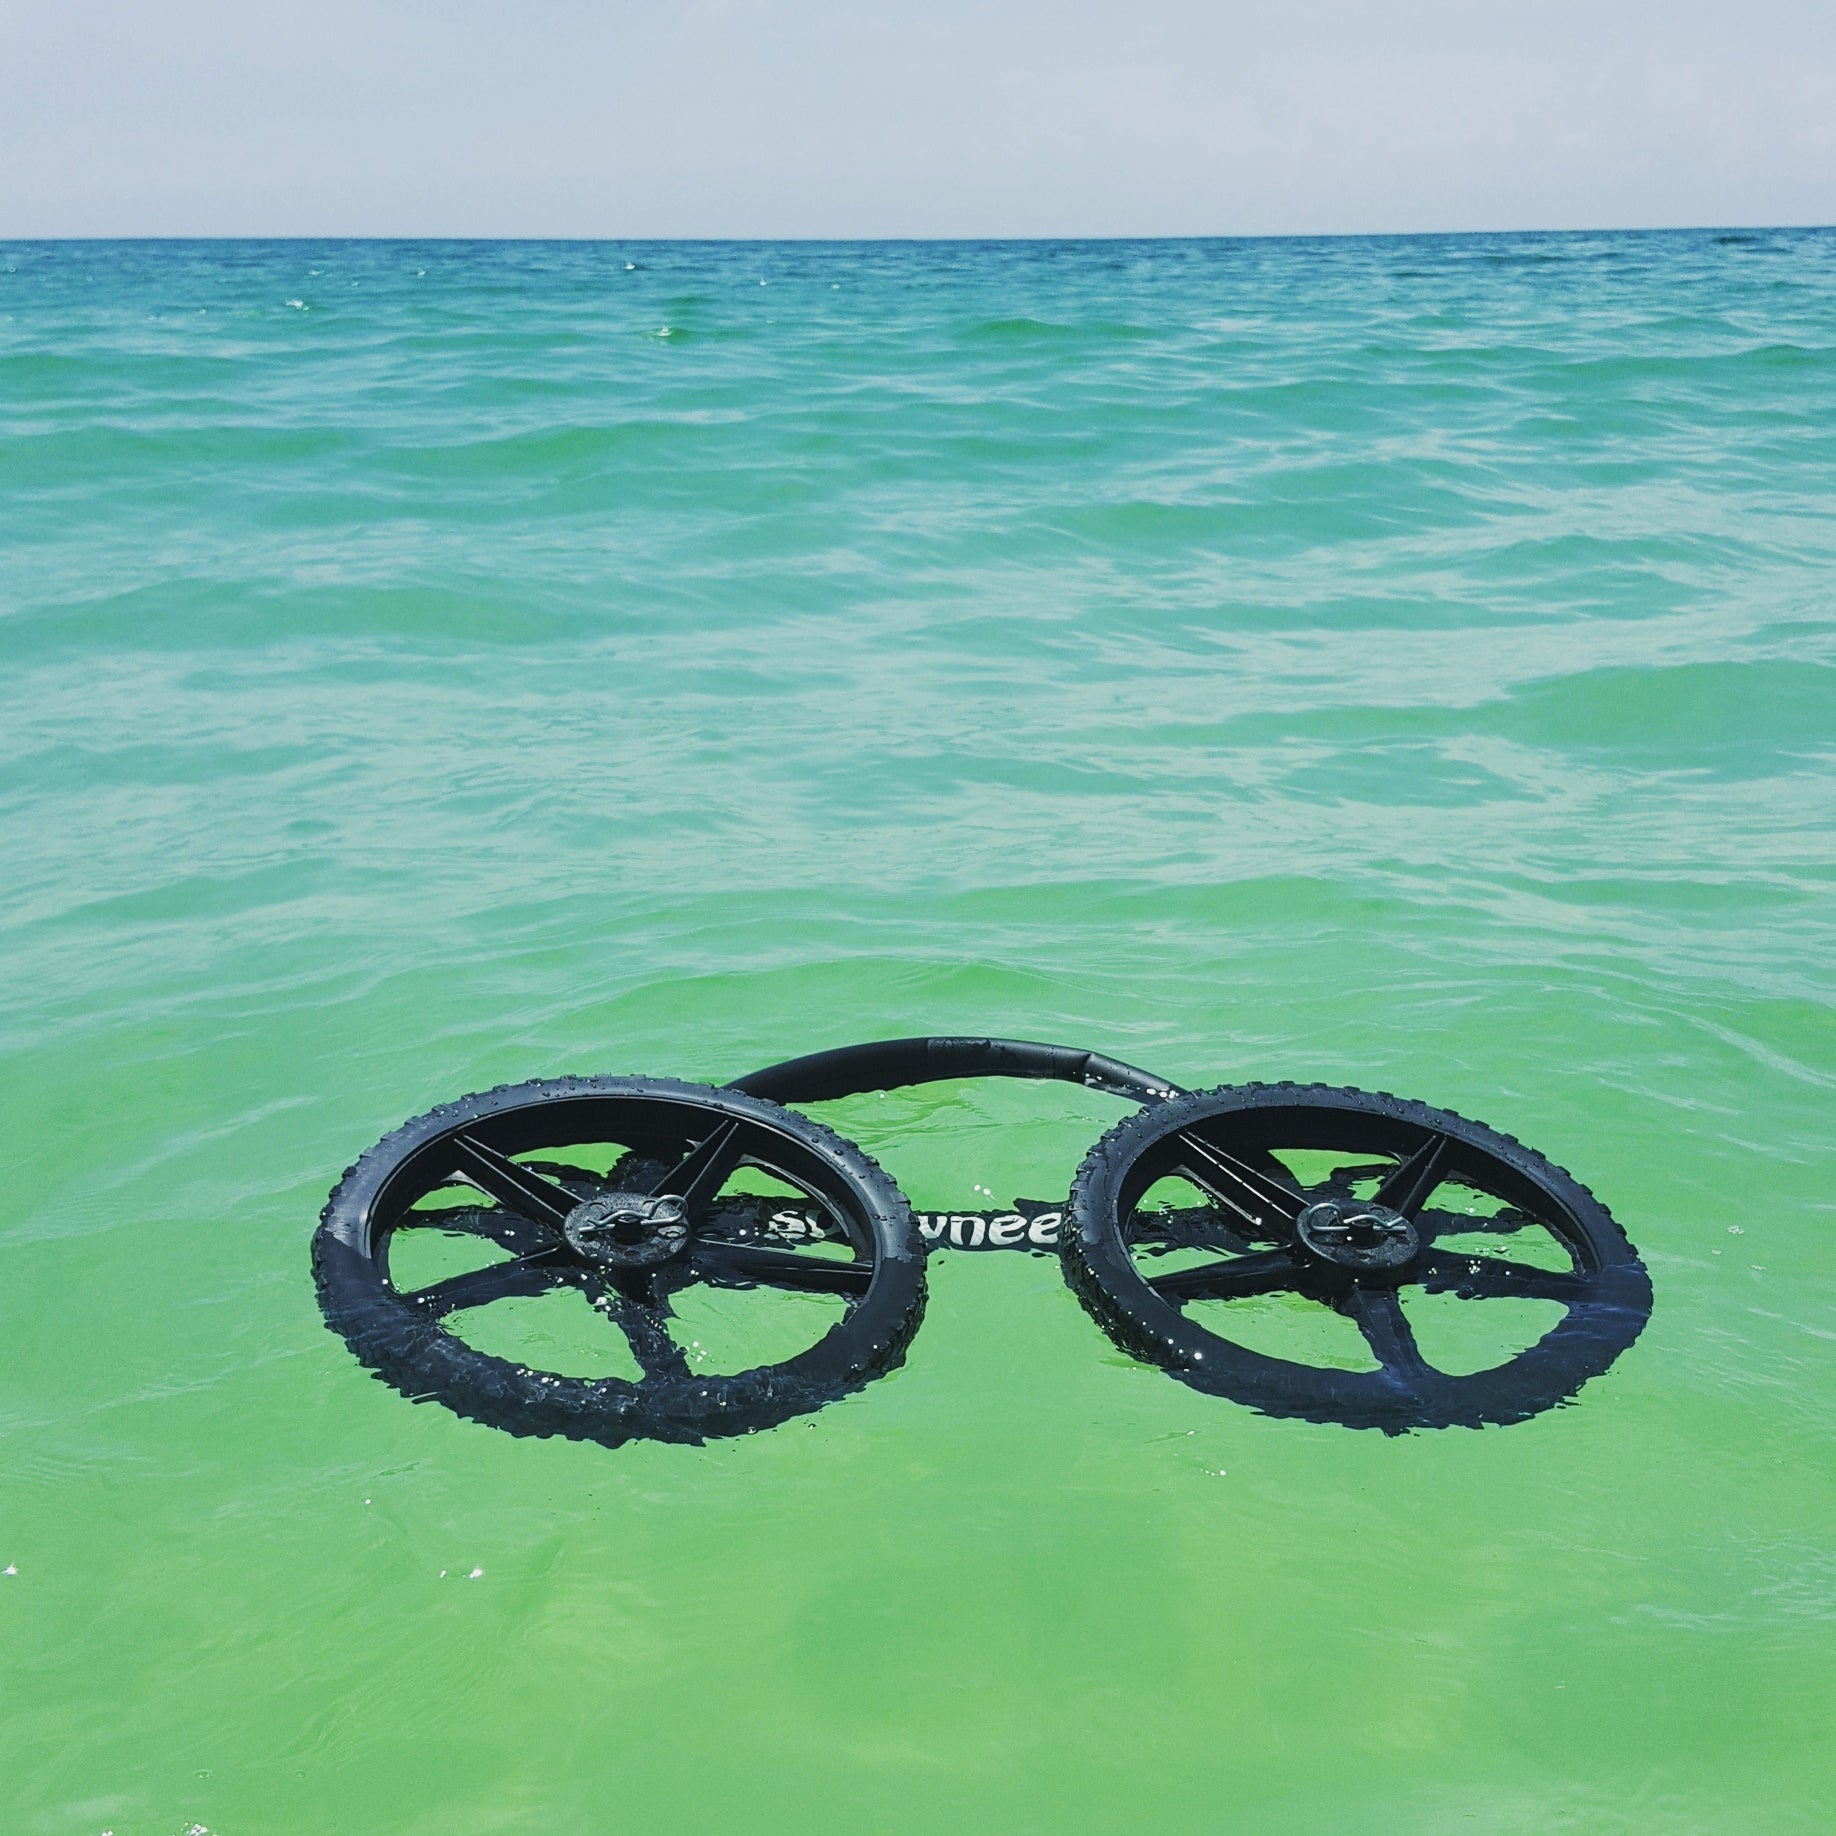 SUP Wheels float in water. Picture on wheels in storage configuration floating in water.